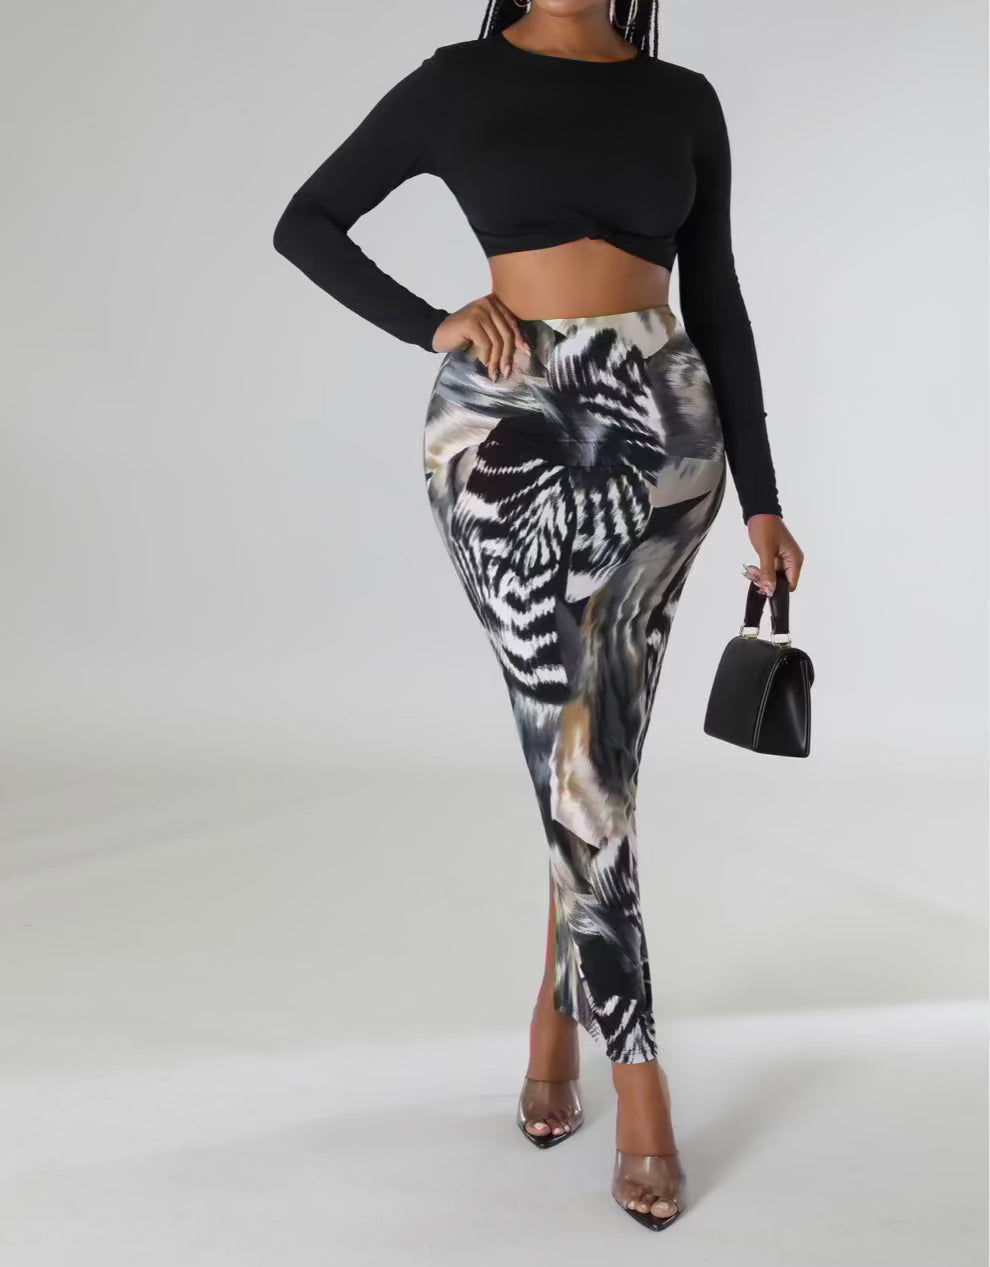 Get trendy with Safari Maxi Skirt Set - Sets available at ELLE TENAJ. Grab yours for $49.00 today!